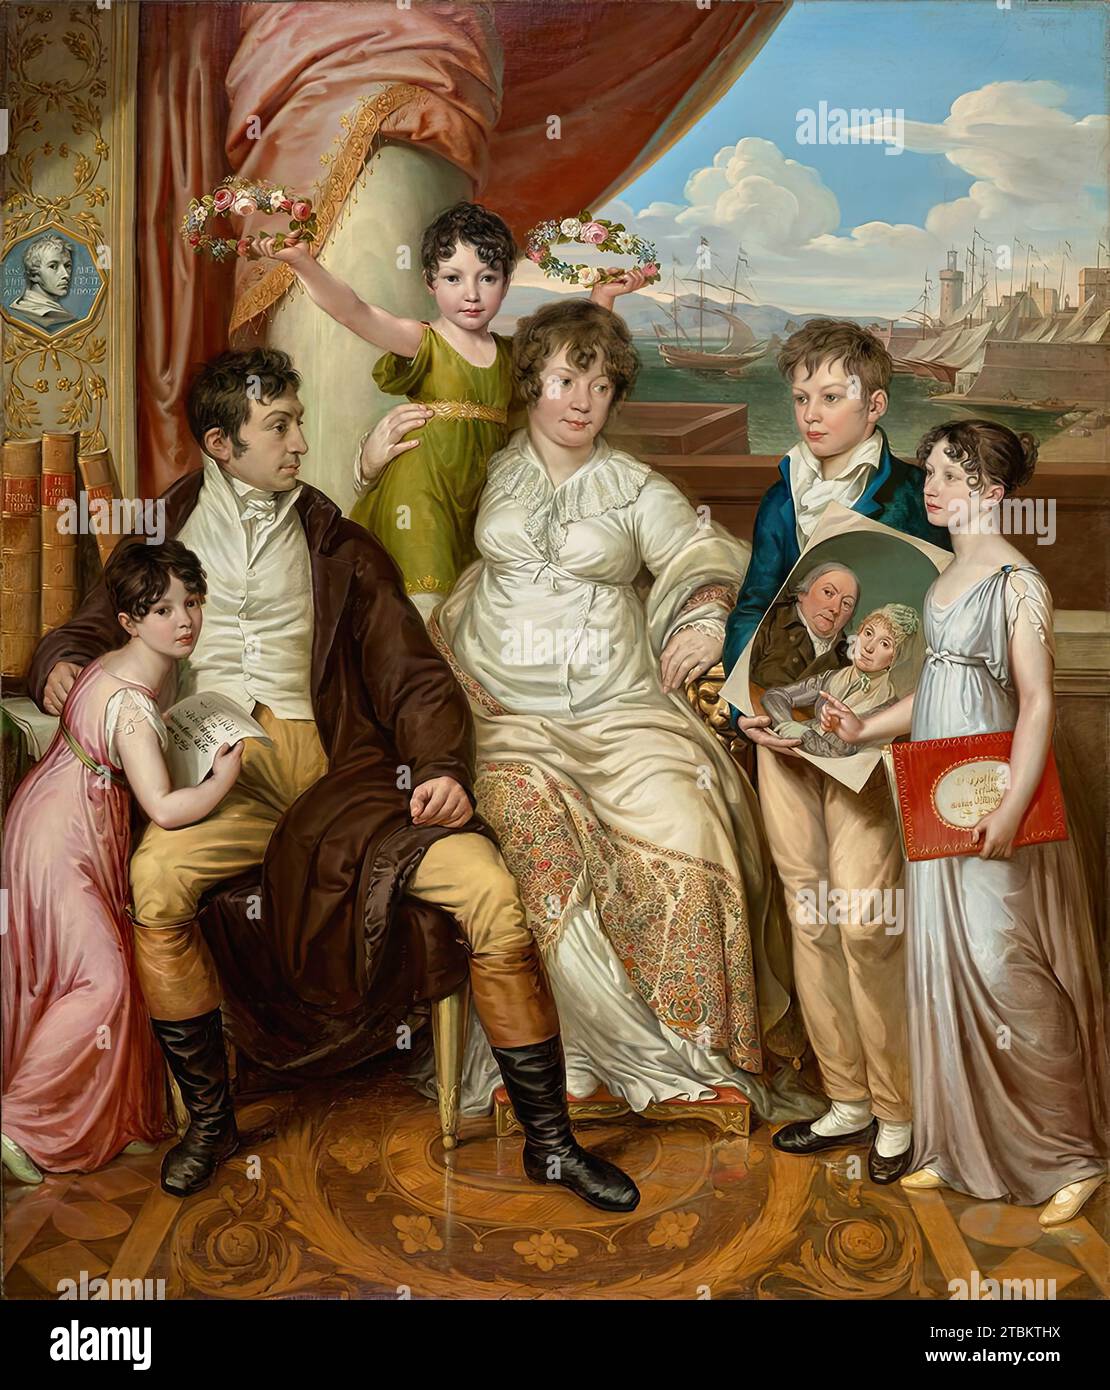 The family of the wholesaler Johann Christian Edler von Bruchmann, 1810. The family portrait shows the wholesaler Johann Christian Edler von Bruchmann (1769-1849), who came from Cologne but lived in Vienna since 1788, with his wife Justina, called Weis (1774-1840, married 1797), and his son Franz Seraph (1798-1867 ) and daughters Sibylla Justina (1799-1820), Isabella Josepha (1801-1836) and Justina Johanna Maria (1805-1829). The oval double portrait that Franz Seraph holds in his hands probably shows the merchant's parents, the merchant and factory owner in Cologne, Christian August Joseph Bru Stock Photo